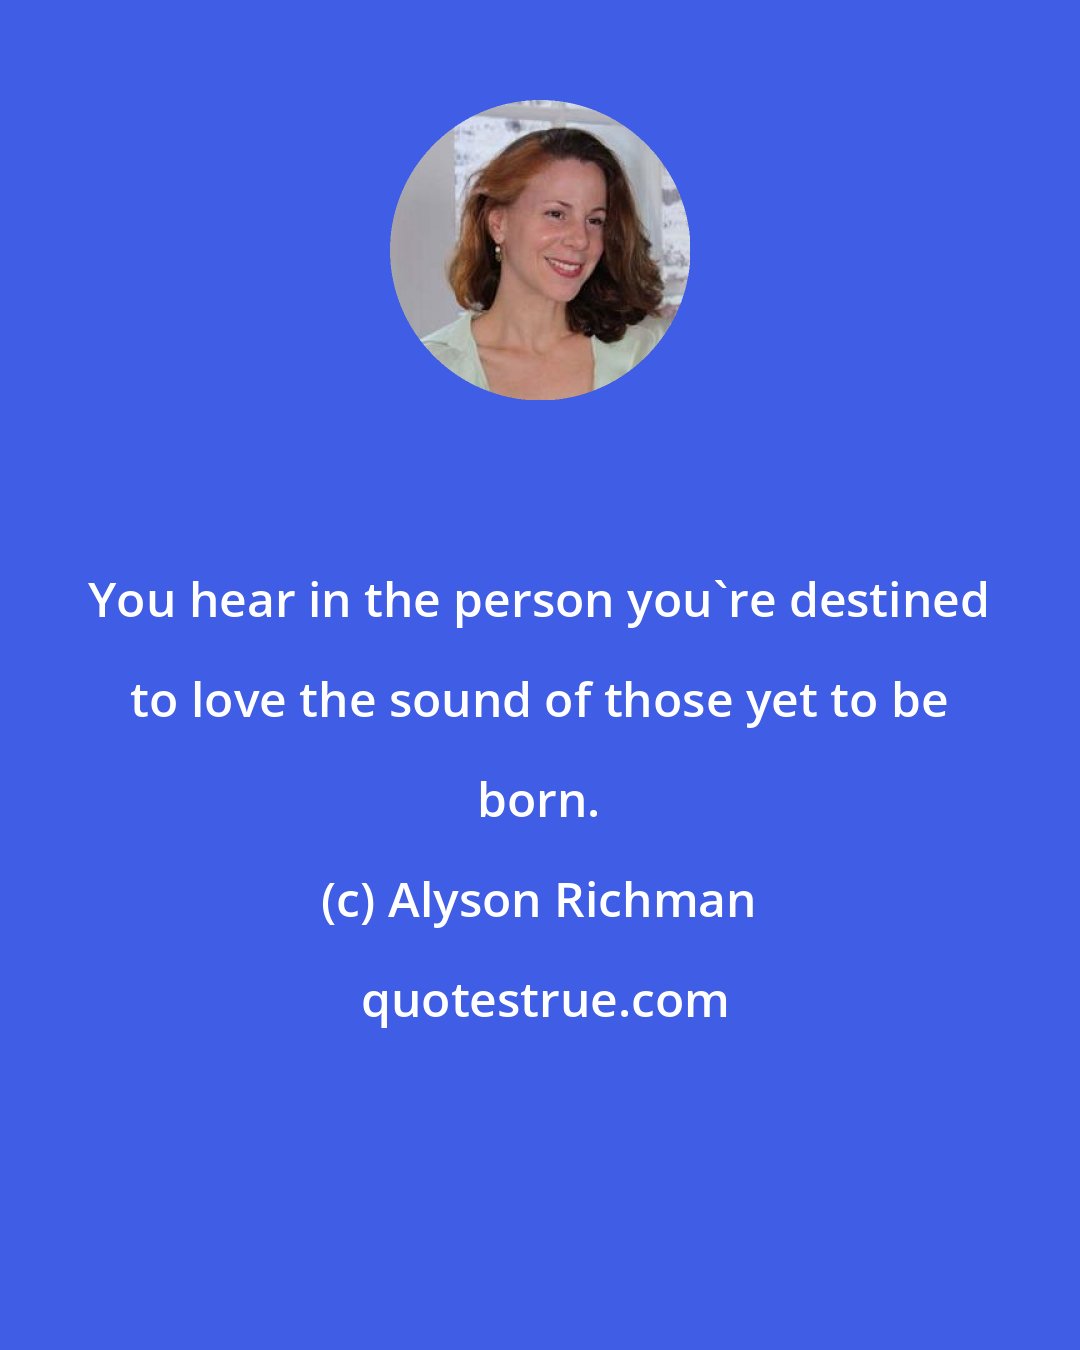 Alyson Richman: You hear in the person you're destined to love the sound of those yet to be born.